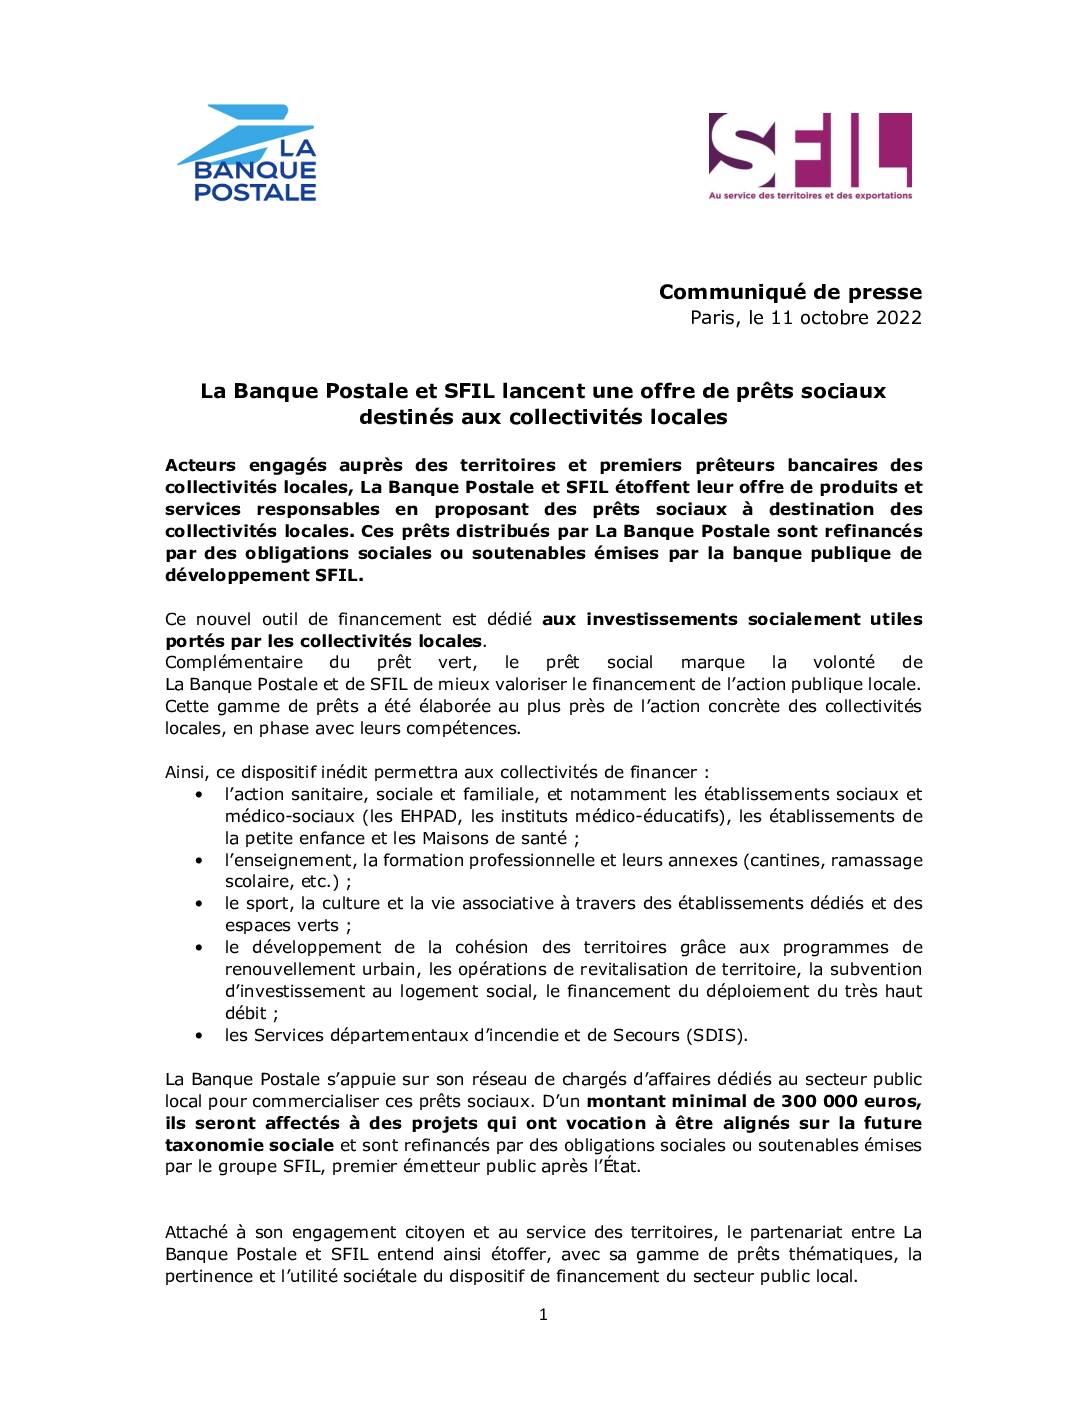 La Banque Postale and Sfil launch a social loan offer for local authorities (French version).